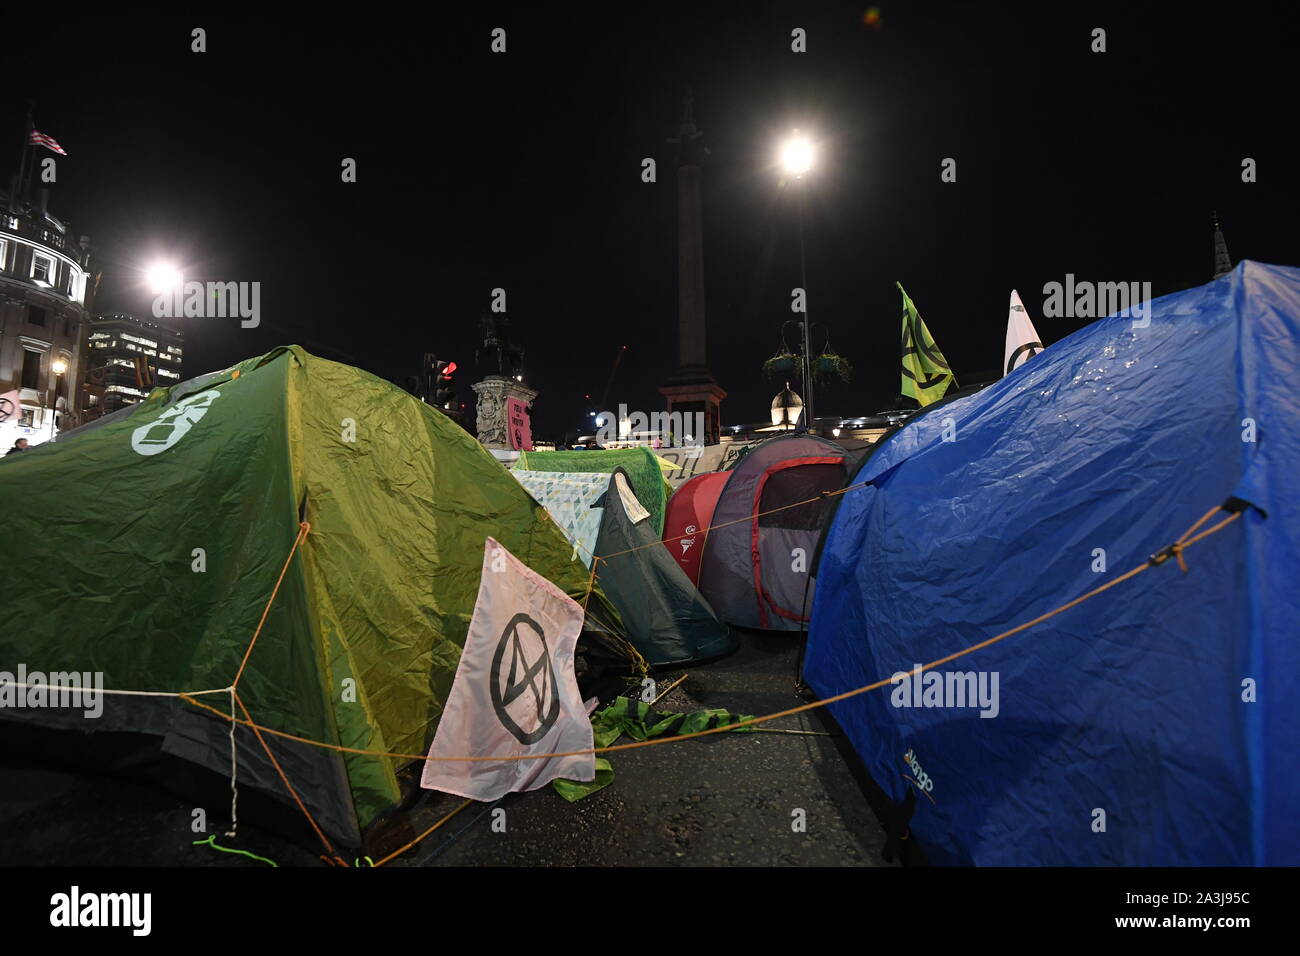 Protesters tents during an Extinction Rebellion (XR) climate change protest in Trafalgar Square, London. PA Photo. Picture date: Tuesday October 8, 2019. See PA story ENVIRONMENT Protests. Photo credit should read: Victoria Jones/PA Wire Stock Photo